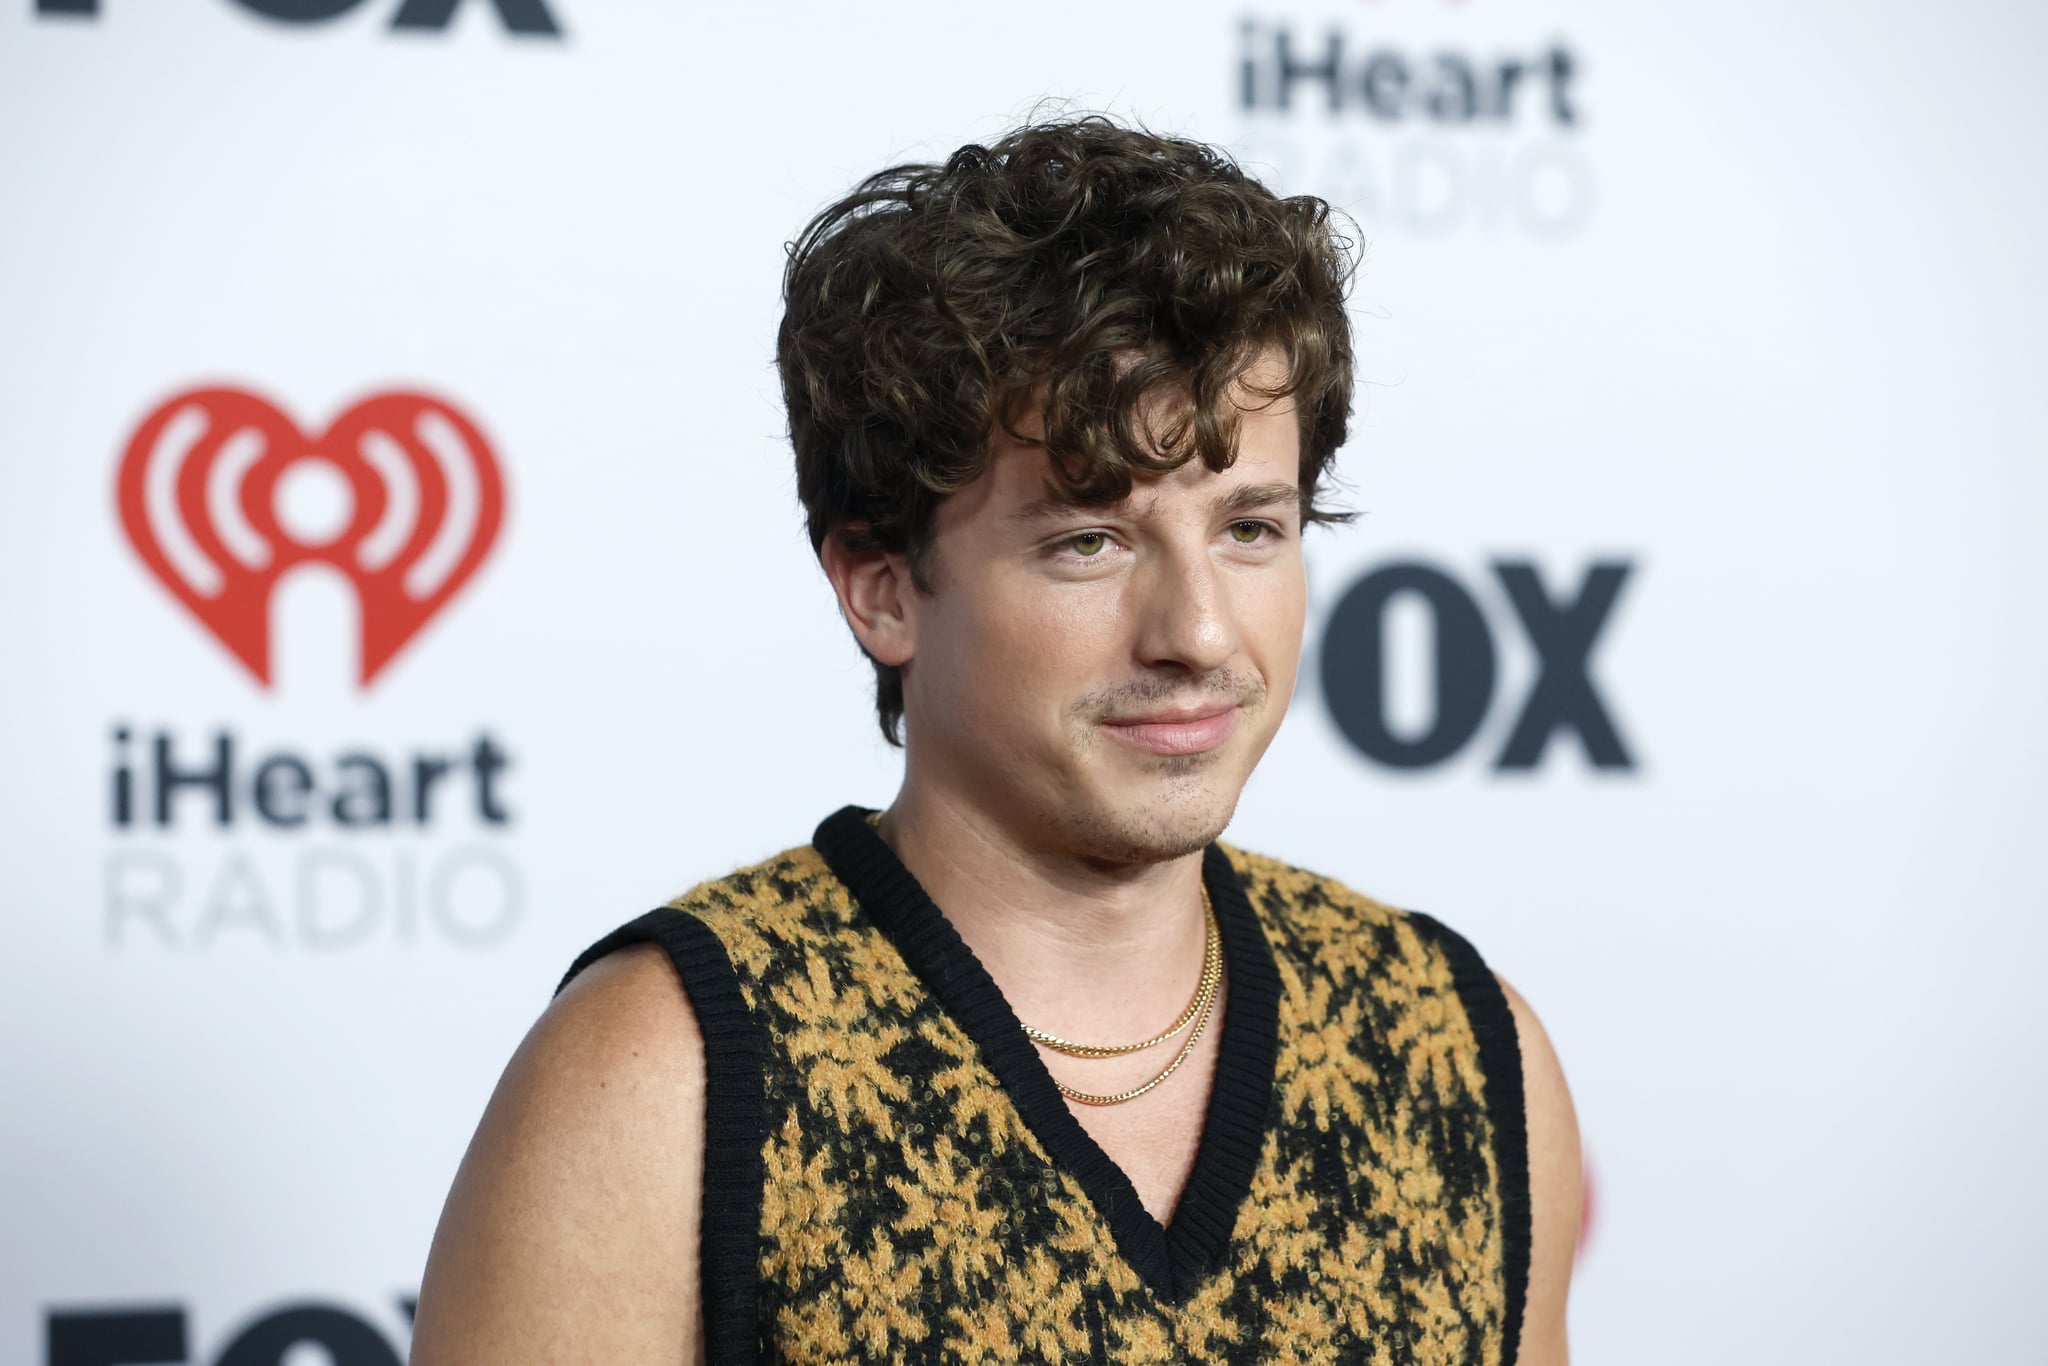 LOS ANGELES, CALIFORNIA - MARCH 22: Charlie Puth attends the 2022 iHeartRadio Music Awards at The Shrine Auditorium in Los Angeles, California on March 22, 2022. (Photo by Frazer Harrison/Getty Images)